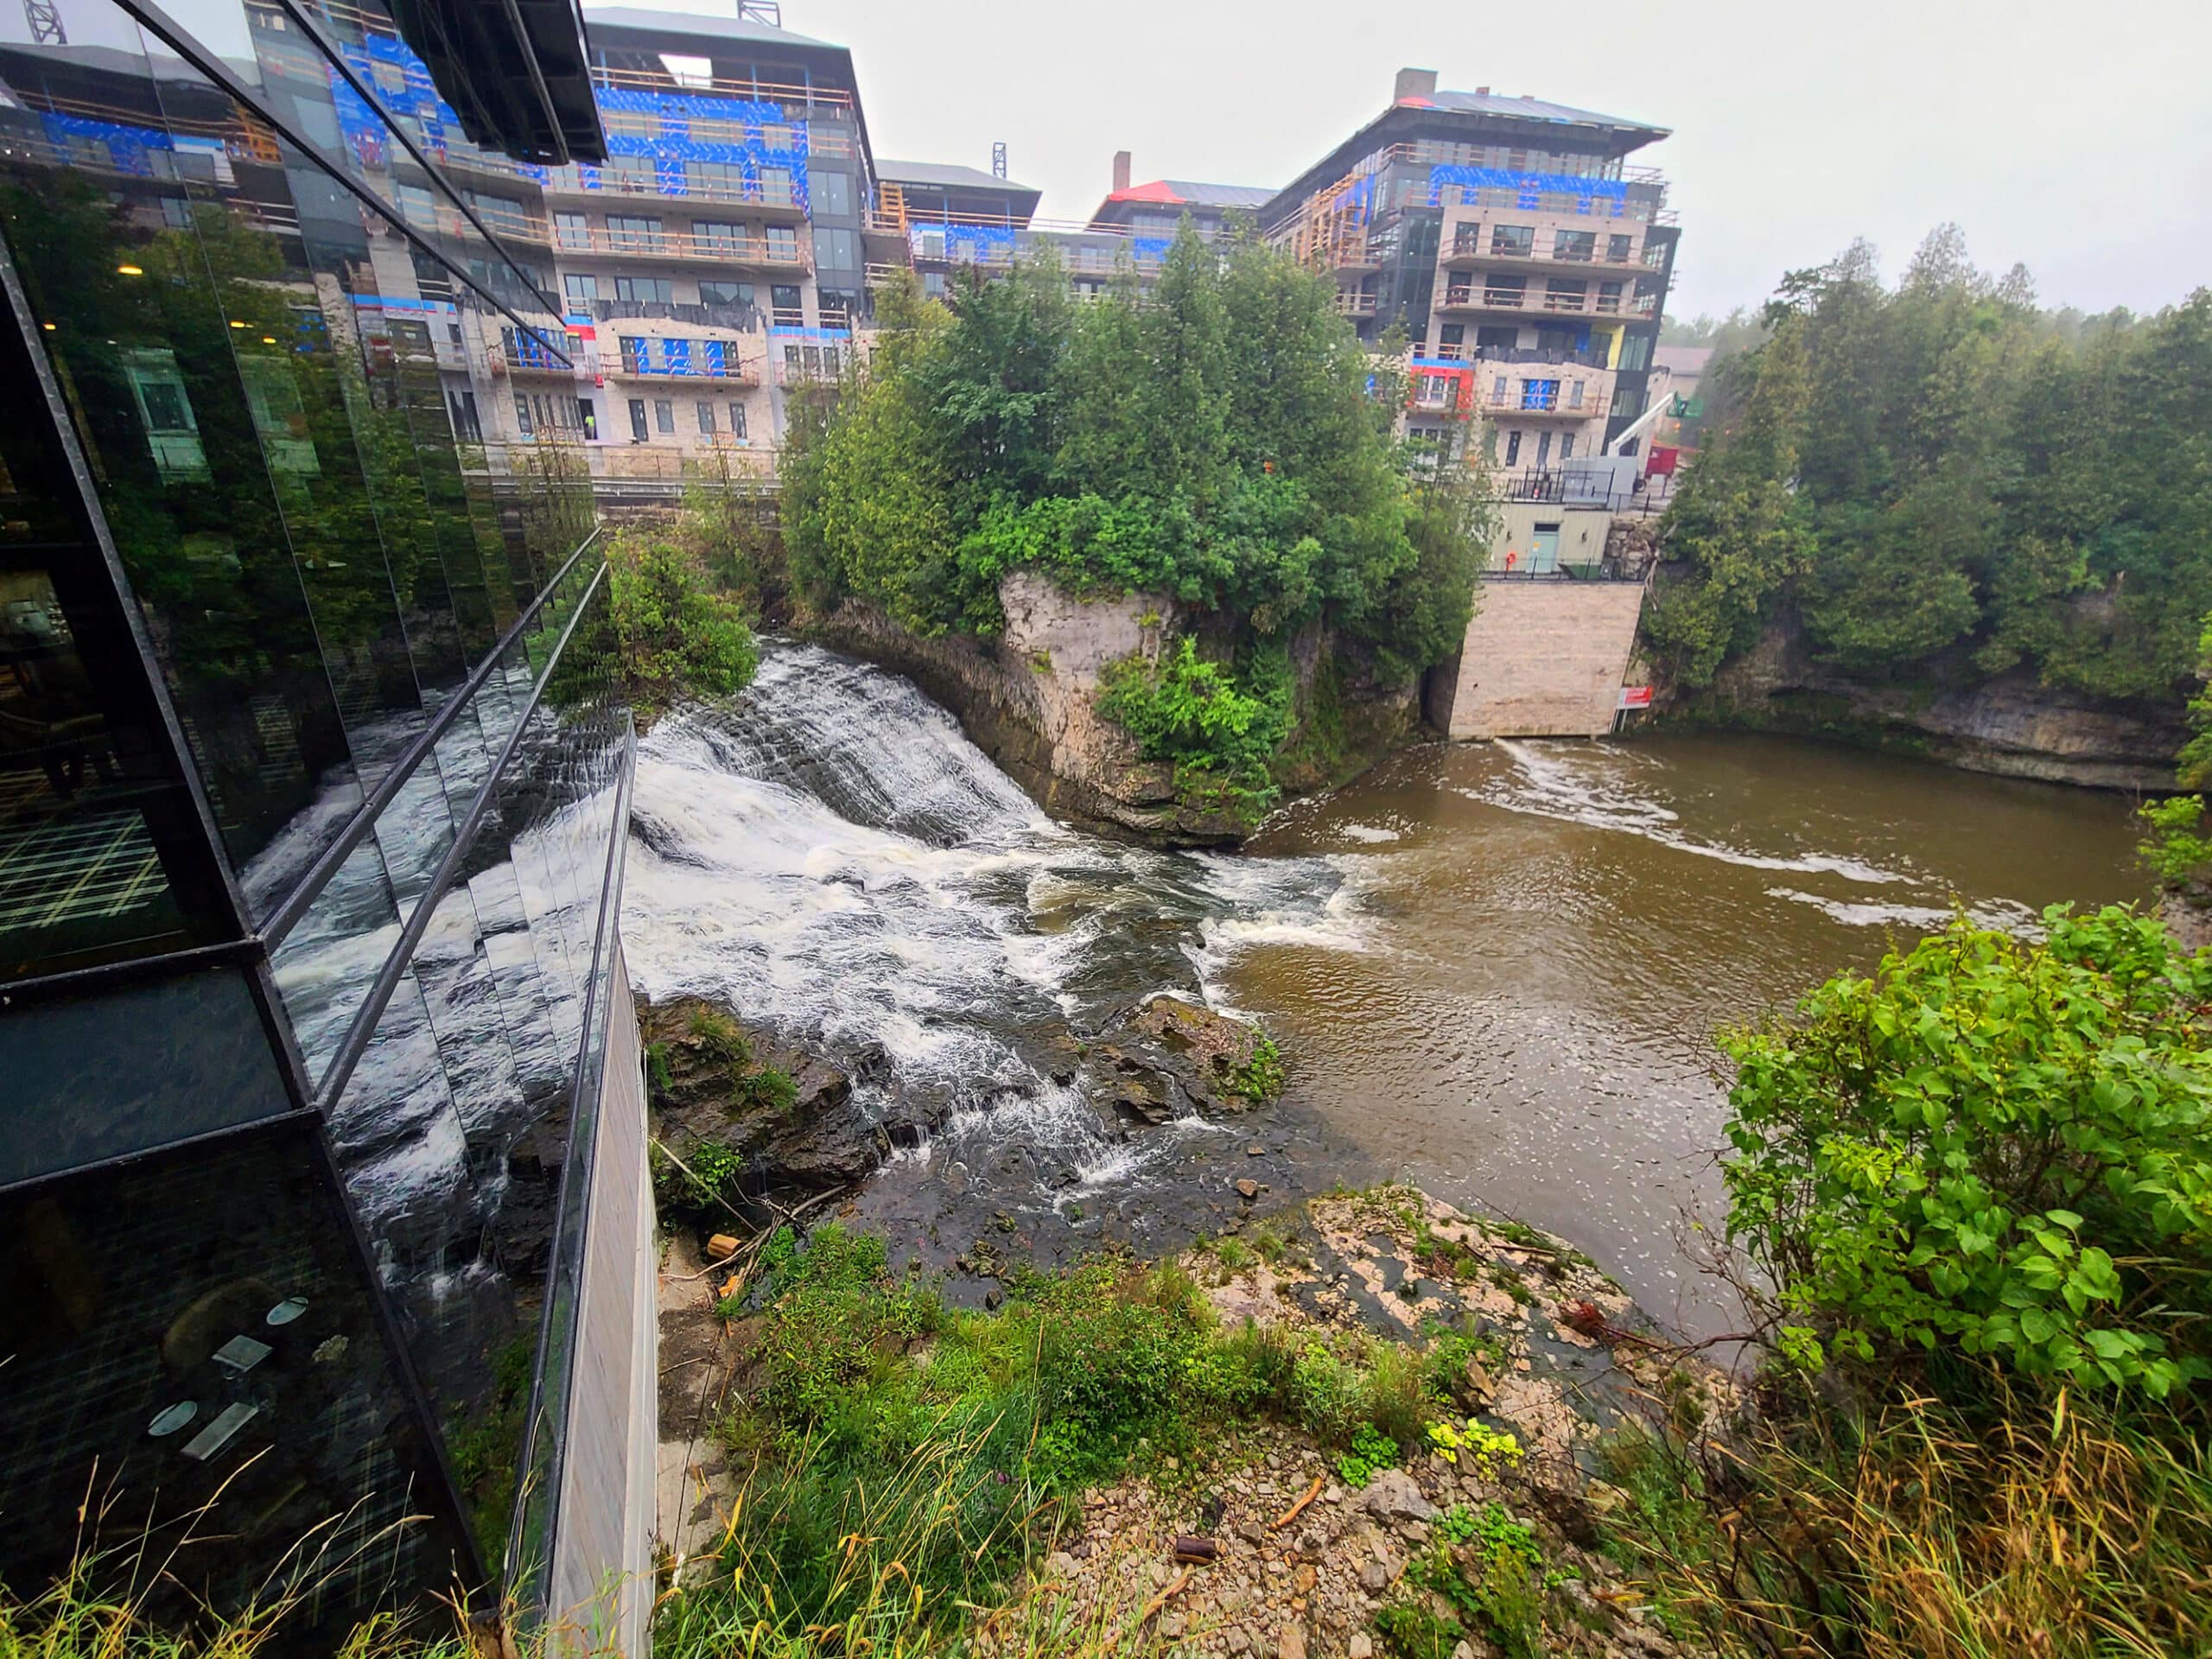 A view overlooking the elora gorge, from beside the elora mill hotel. There are waterfalls below.